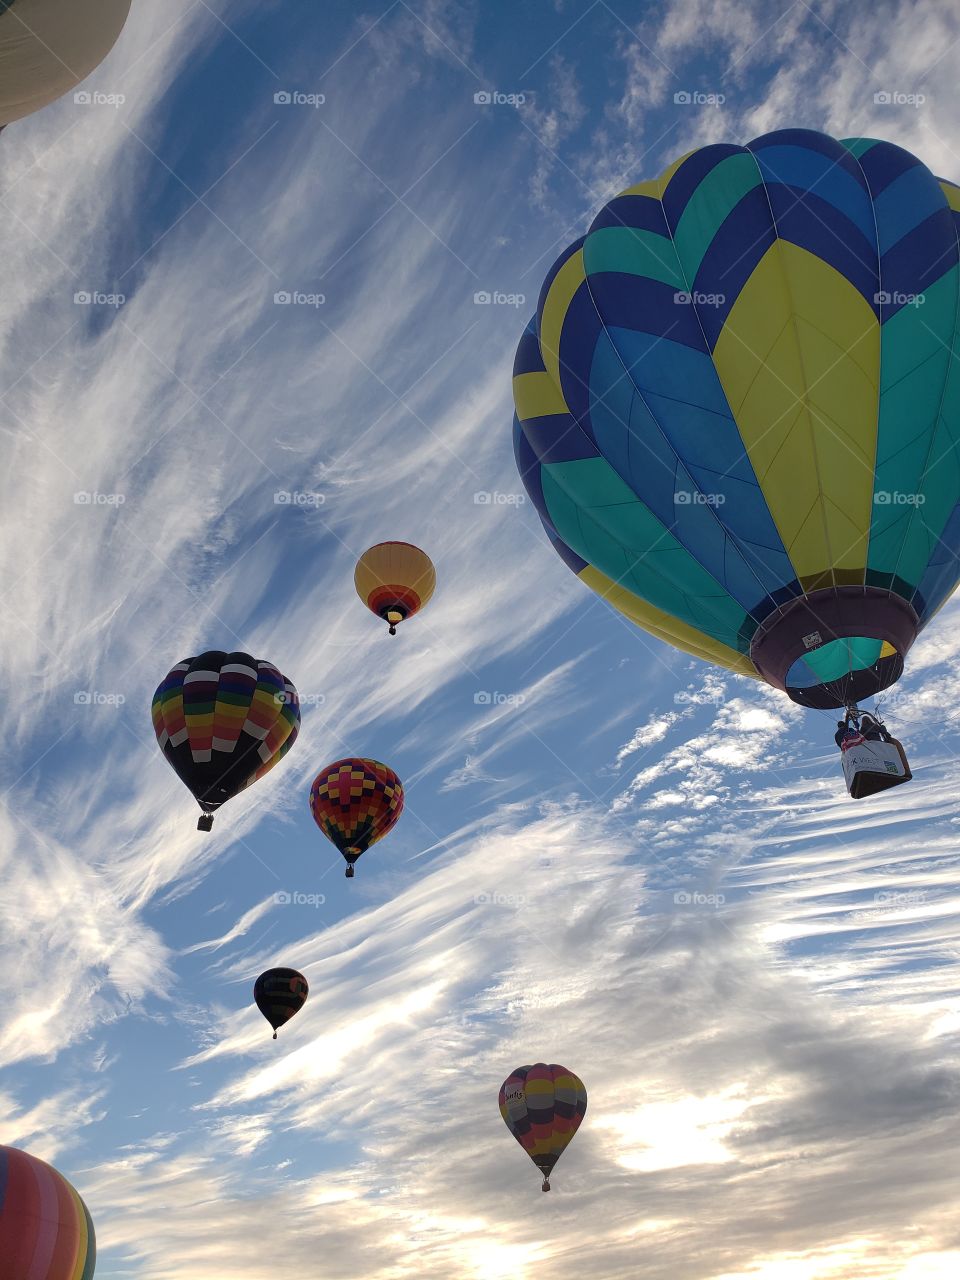 Six colorful hot air balloons flying in a blue and white sky backdrop.